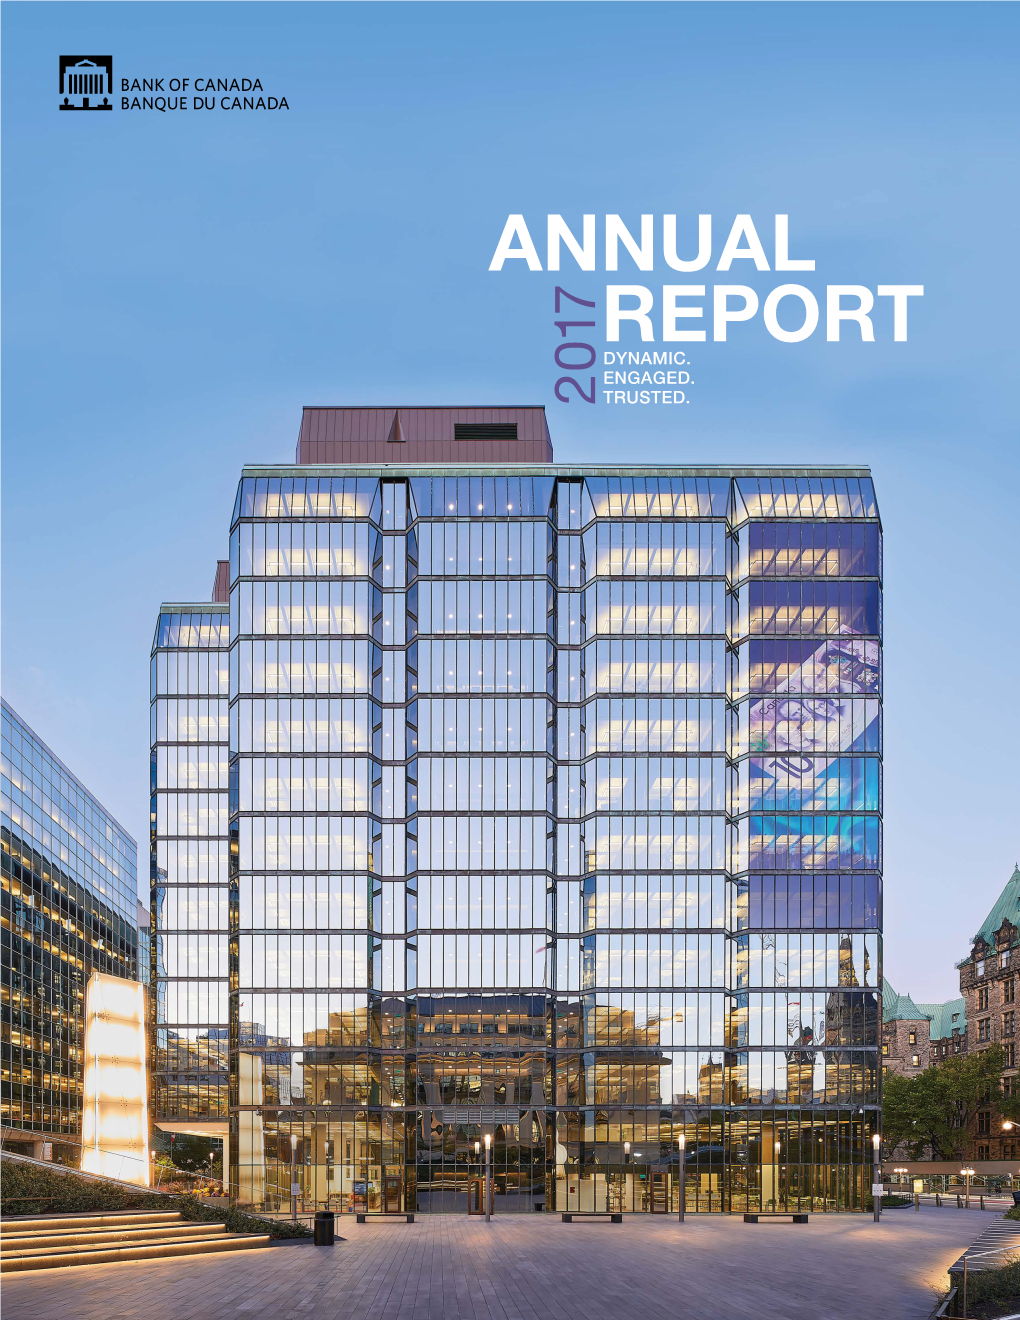 Annual Report 2017 Rapport Annuel 2017 De La Banque Du Canada the Annual Report Is Available on the Bank of Canada’S Website at Bankofcanada.Ca